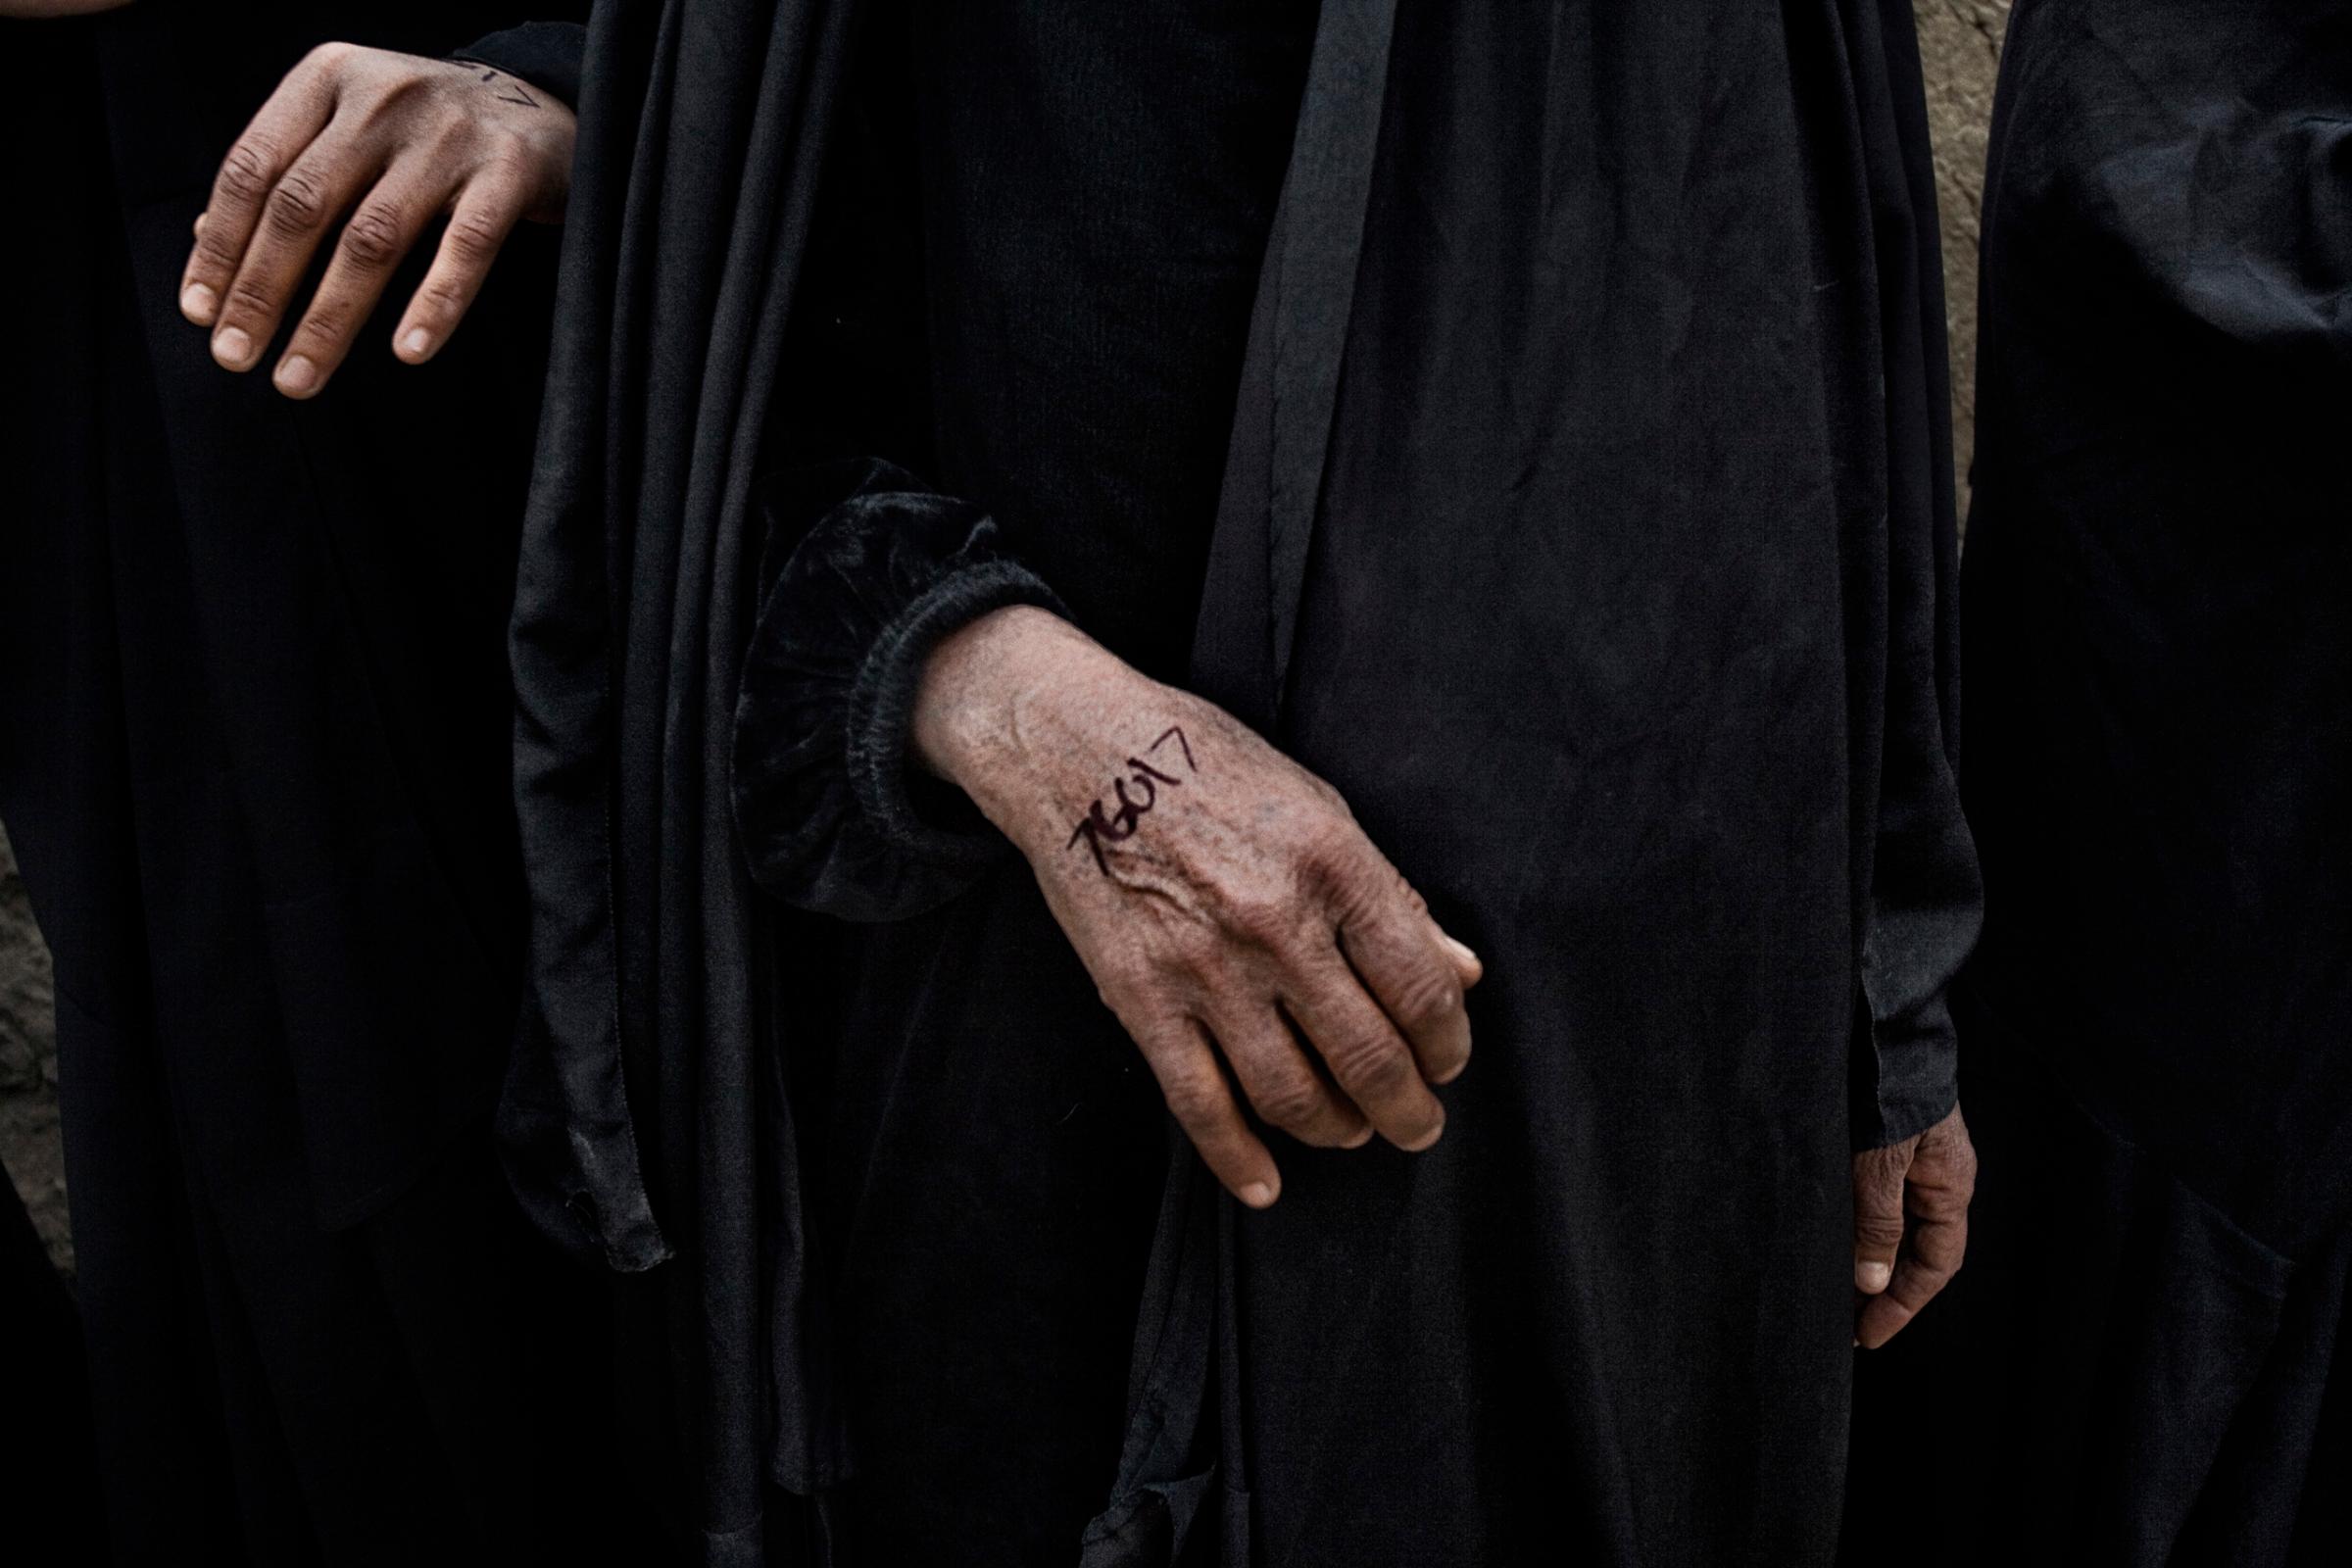 Numbers written on the hand of an Iraqi woman in Qubah, a village in Diyala Province, Iraq, March 24, 2007.